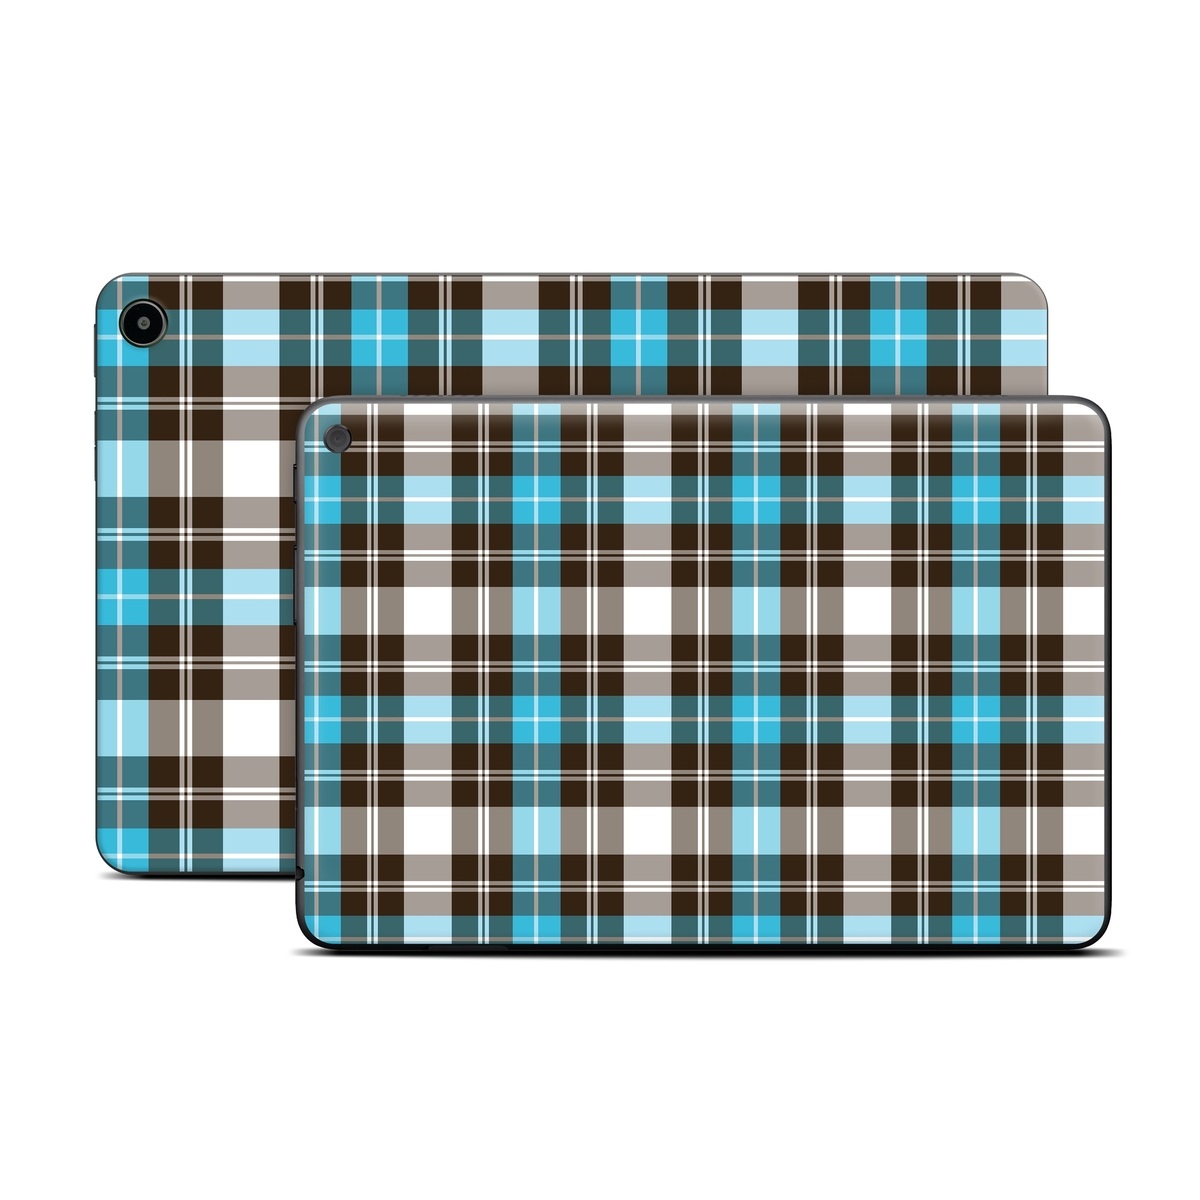 Amazon Fire Tablet Series Skin Skin design of Plaid, Pattern, Tartan, Turquoise, Textile, Design, Brown, Line, Tints and shades, with gray, black, blue, white colors